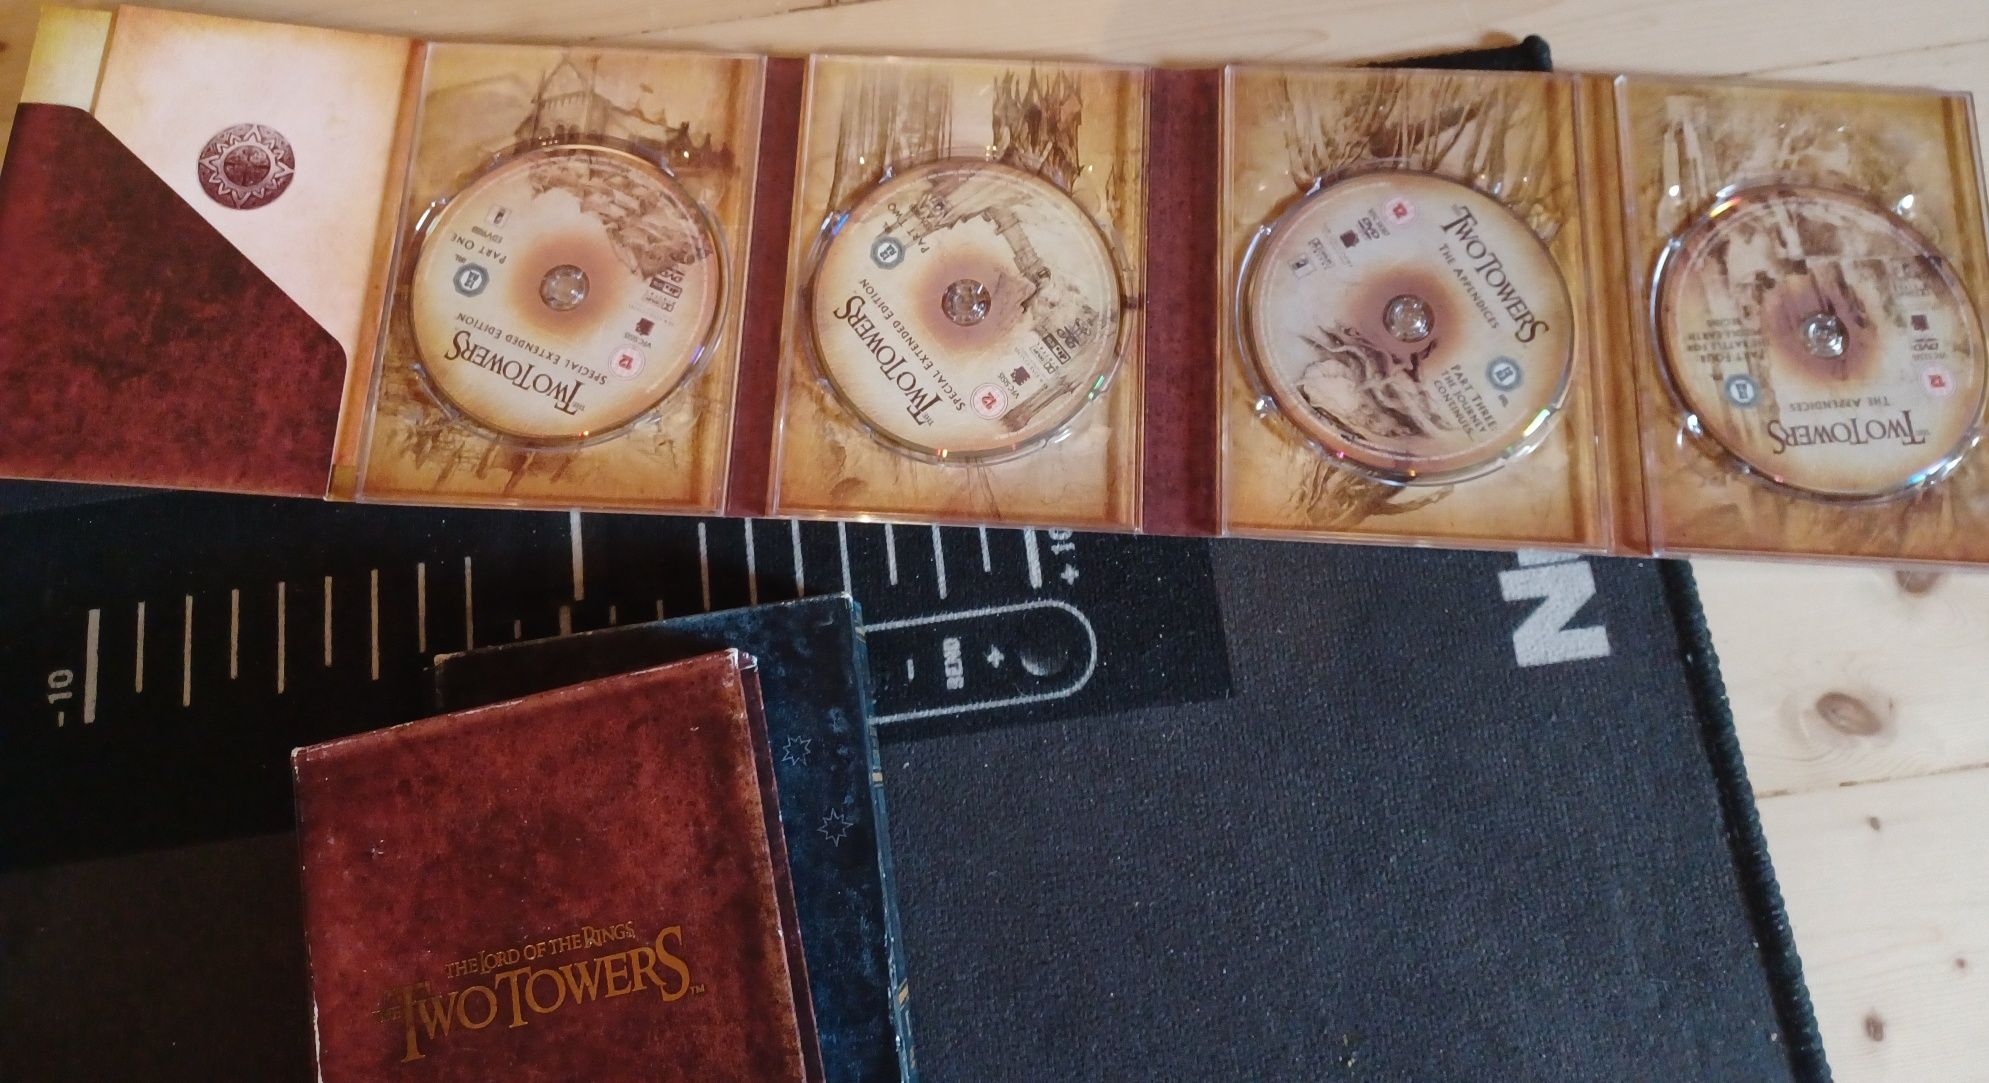 Lord of the rings dvd zestaw